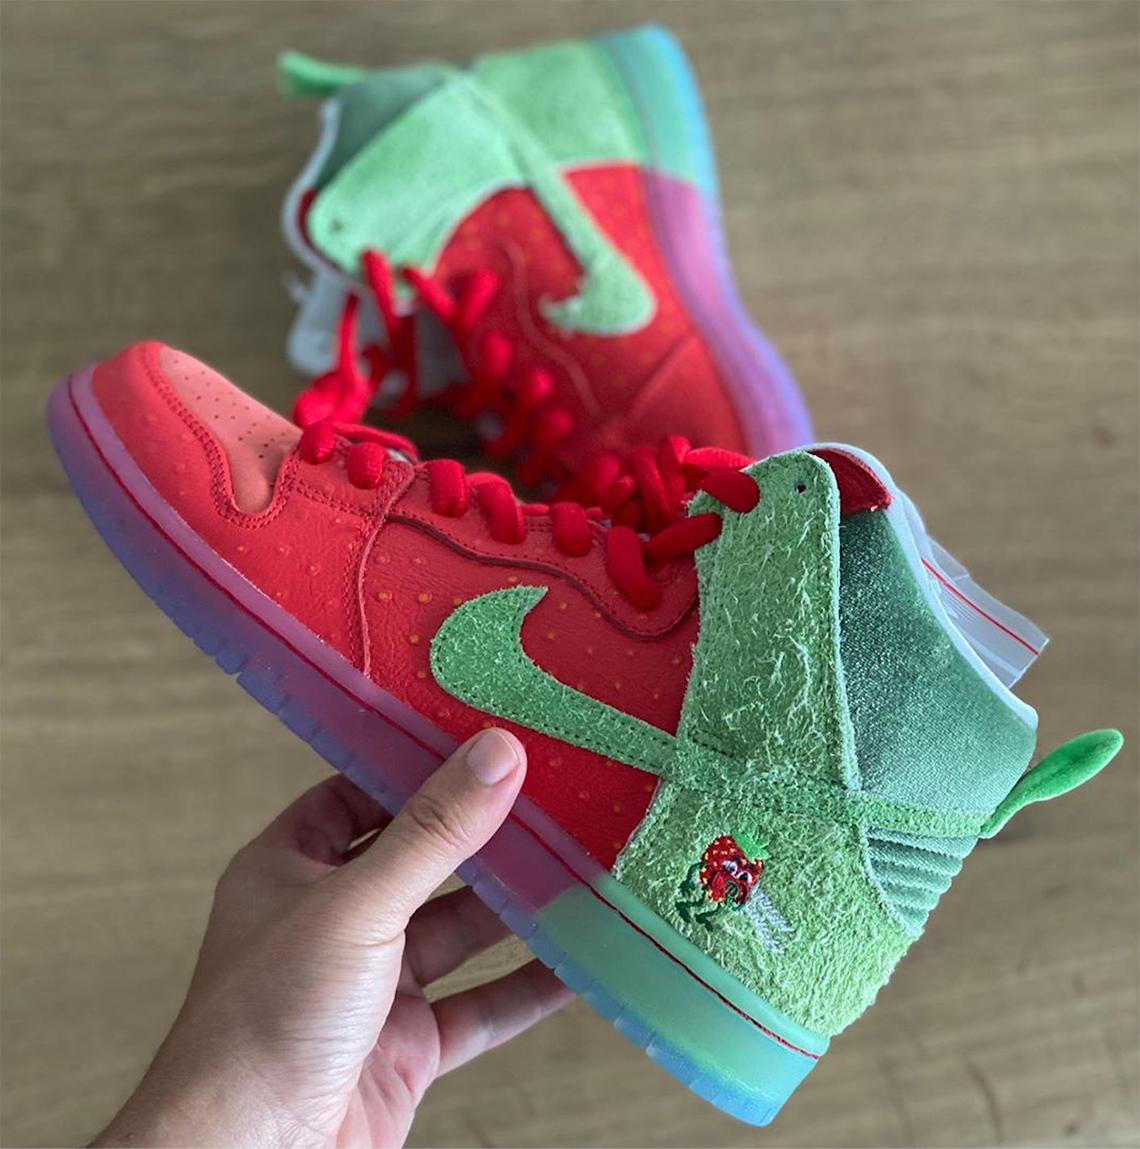 Nike SB Dunk High Strawberry Cough Release Info + Photos 